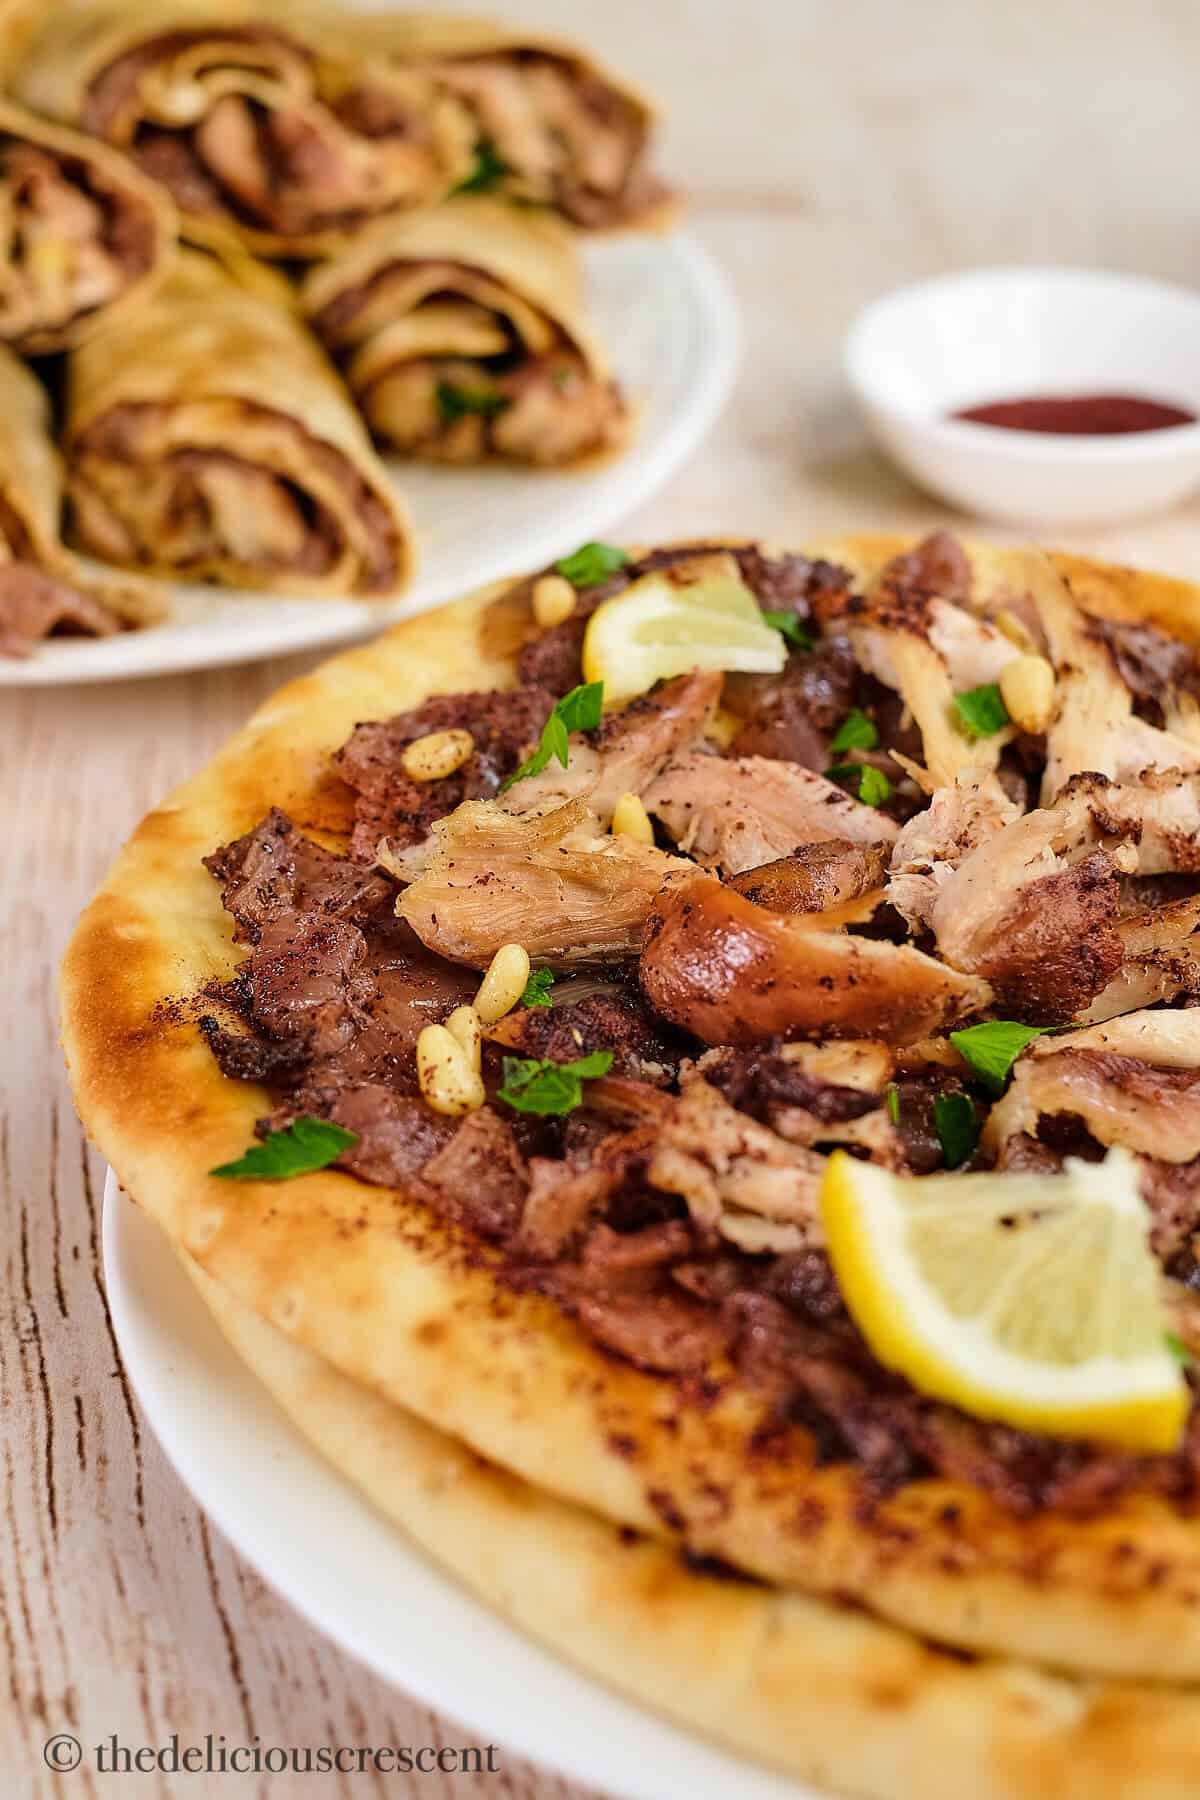 Palestinian sumac chicken onion flatbread served on the table.